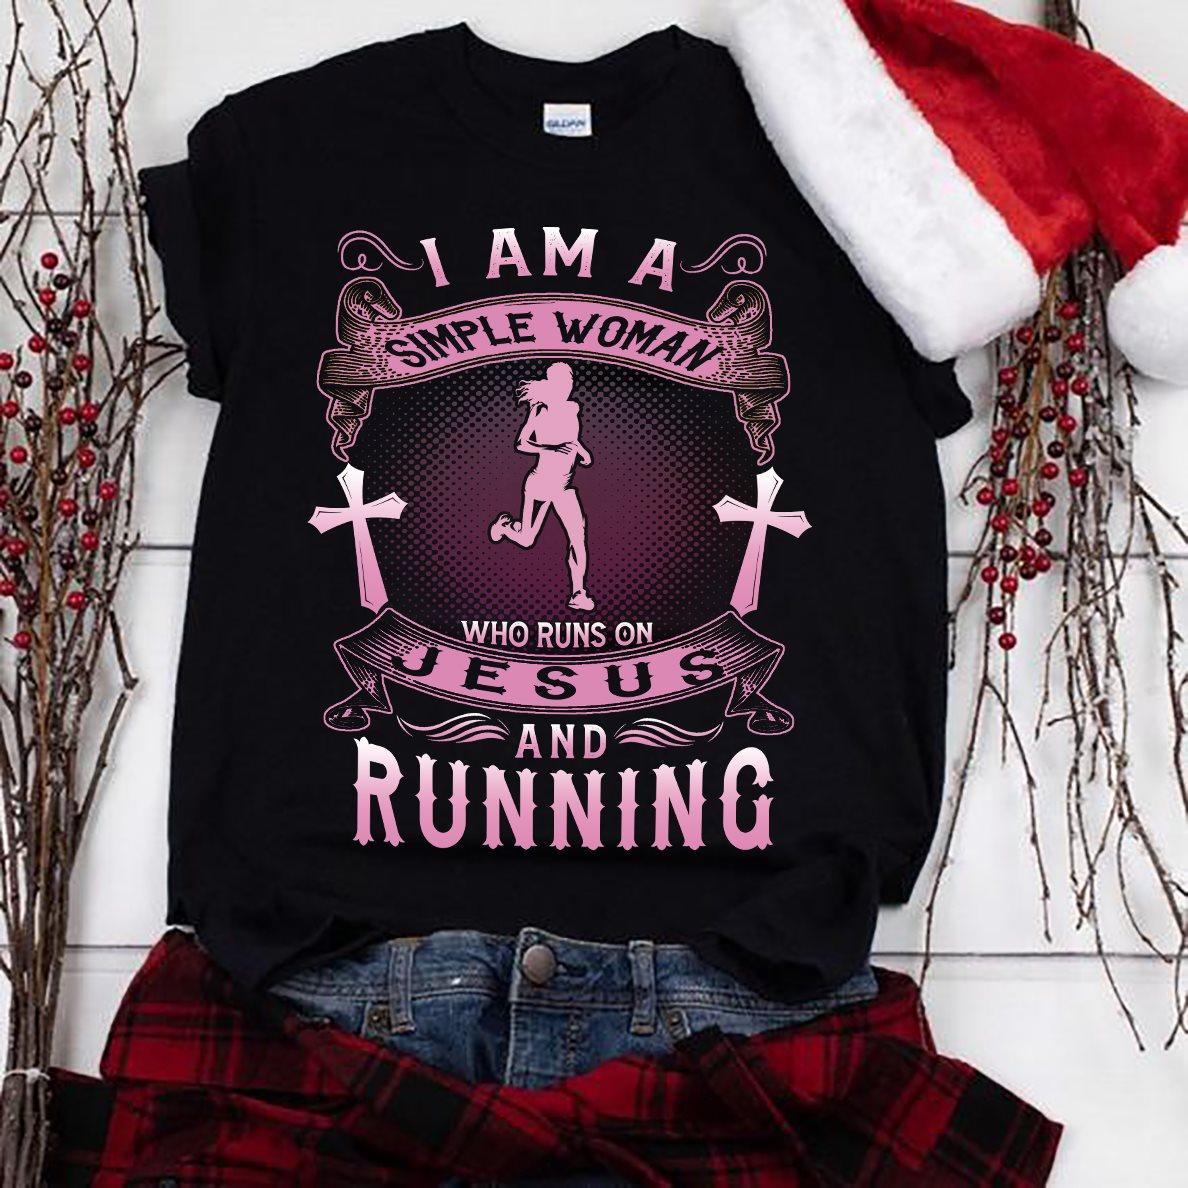 Running Woman - I am a simple woman who runs on Jesus and running